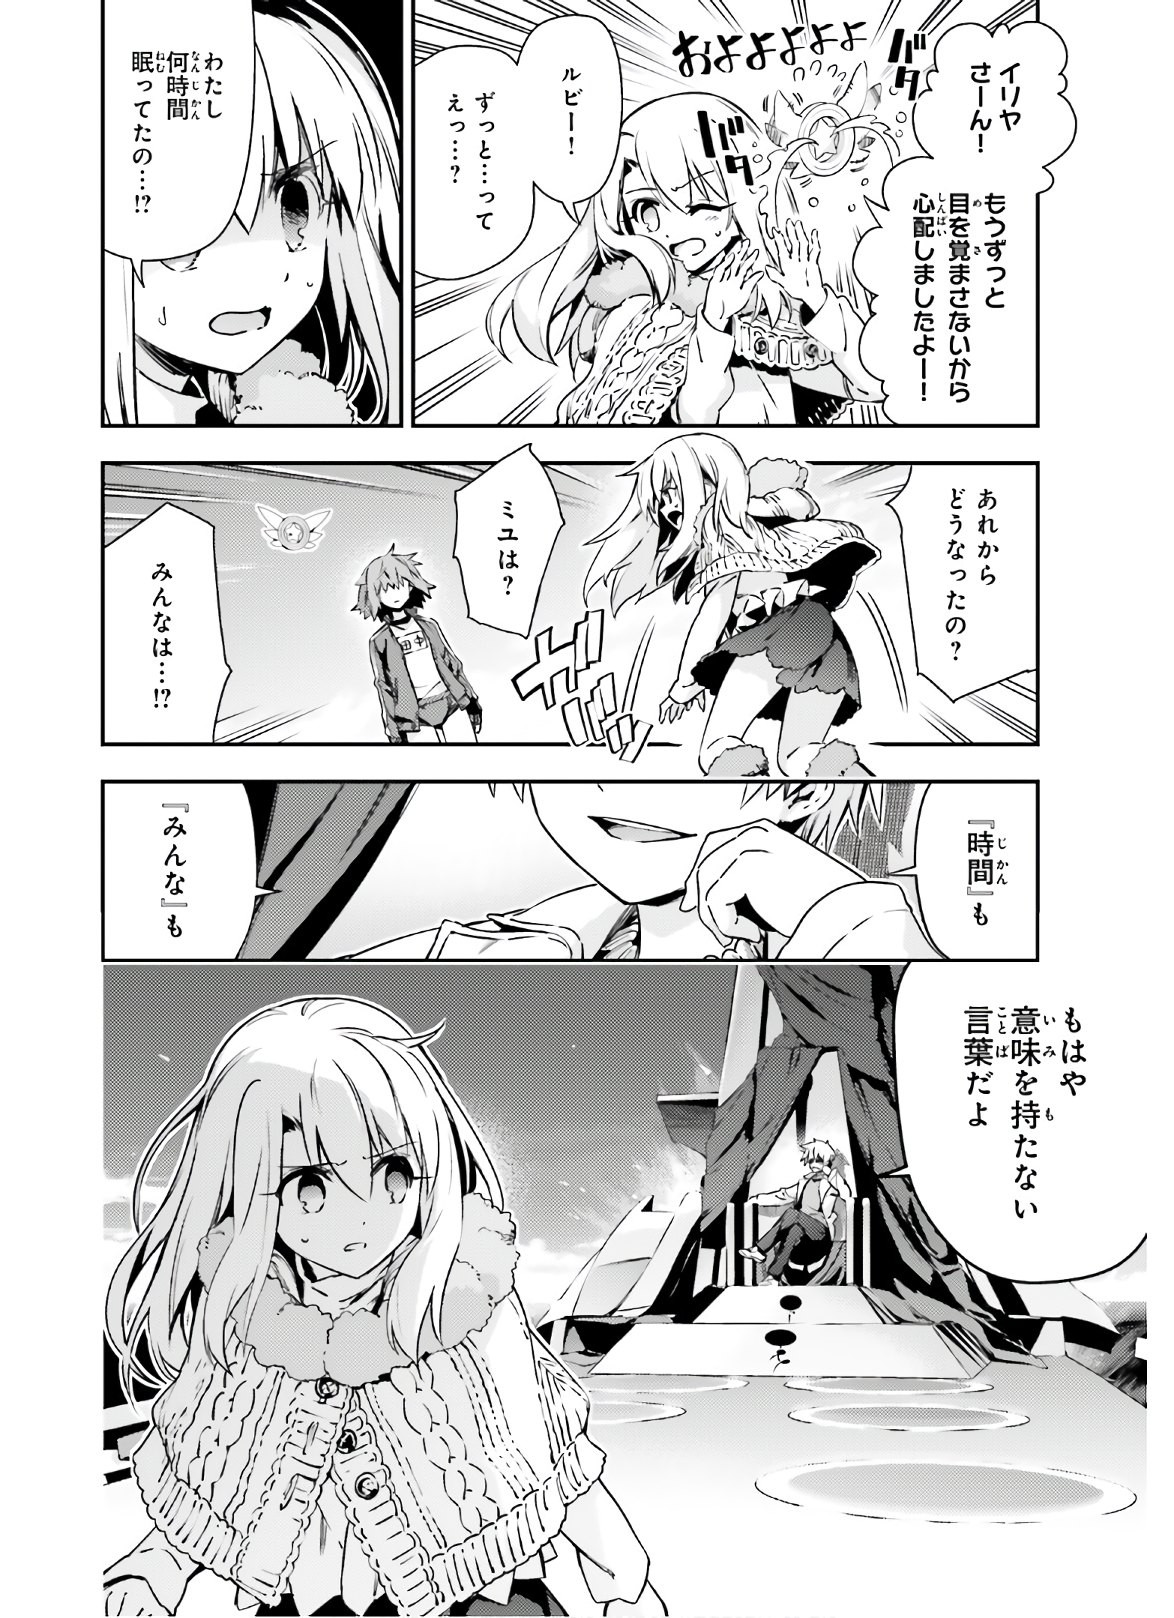 Fate/Kaleid Liner Prisma Illya Drei! - Chapter 62-1 - Page 2